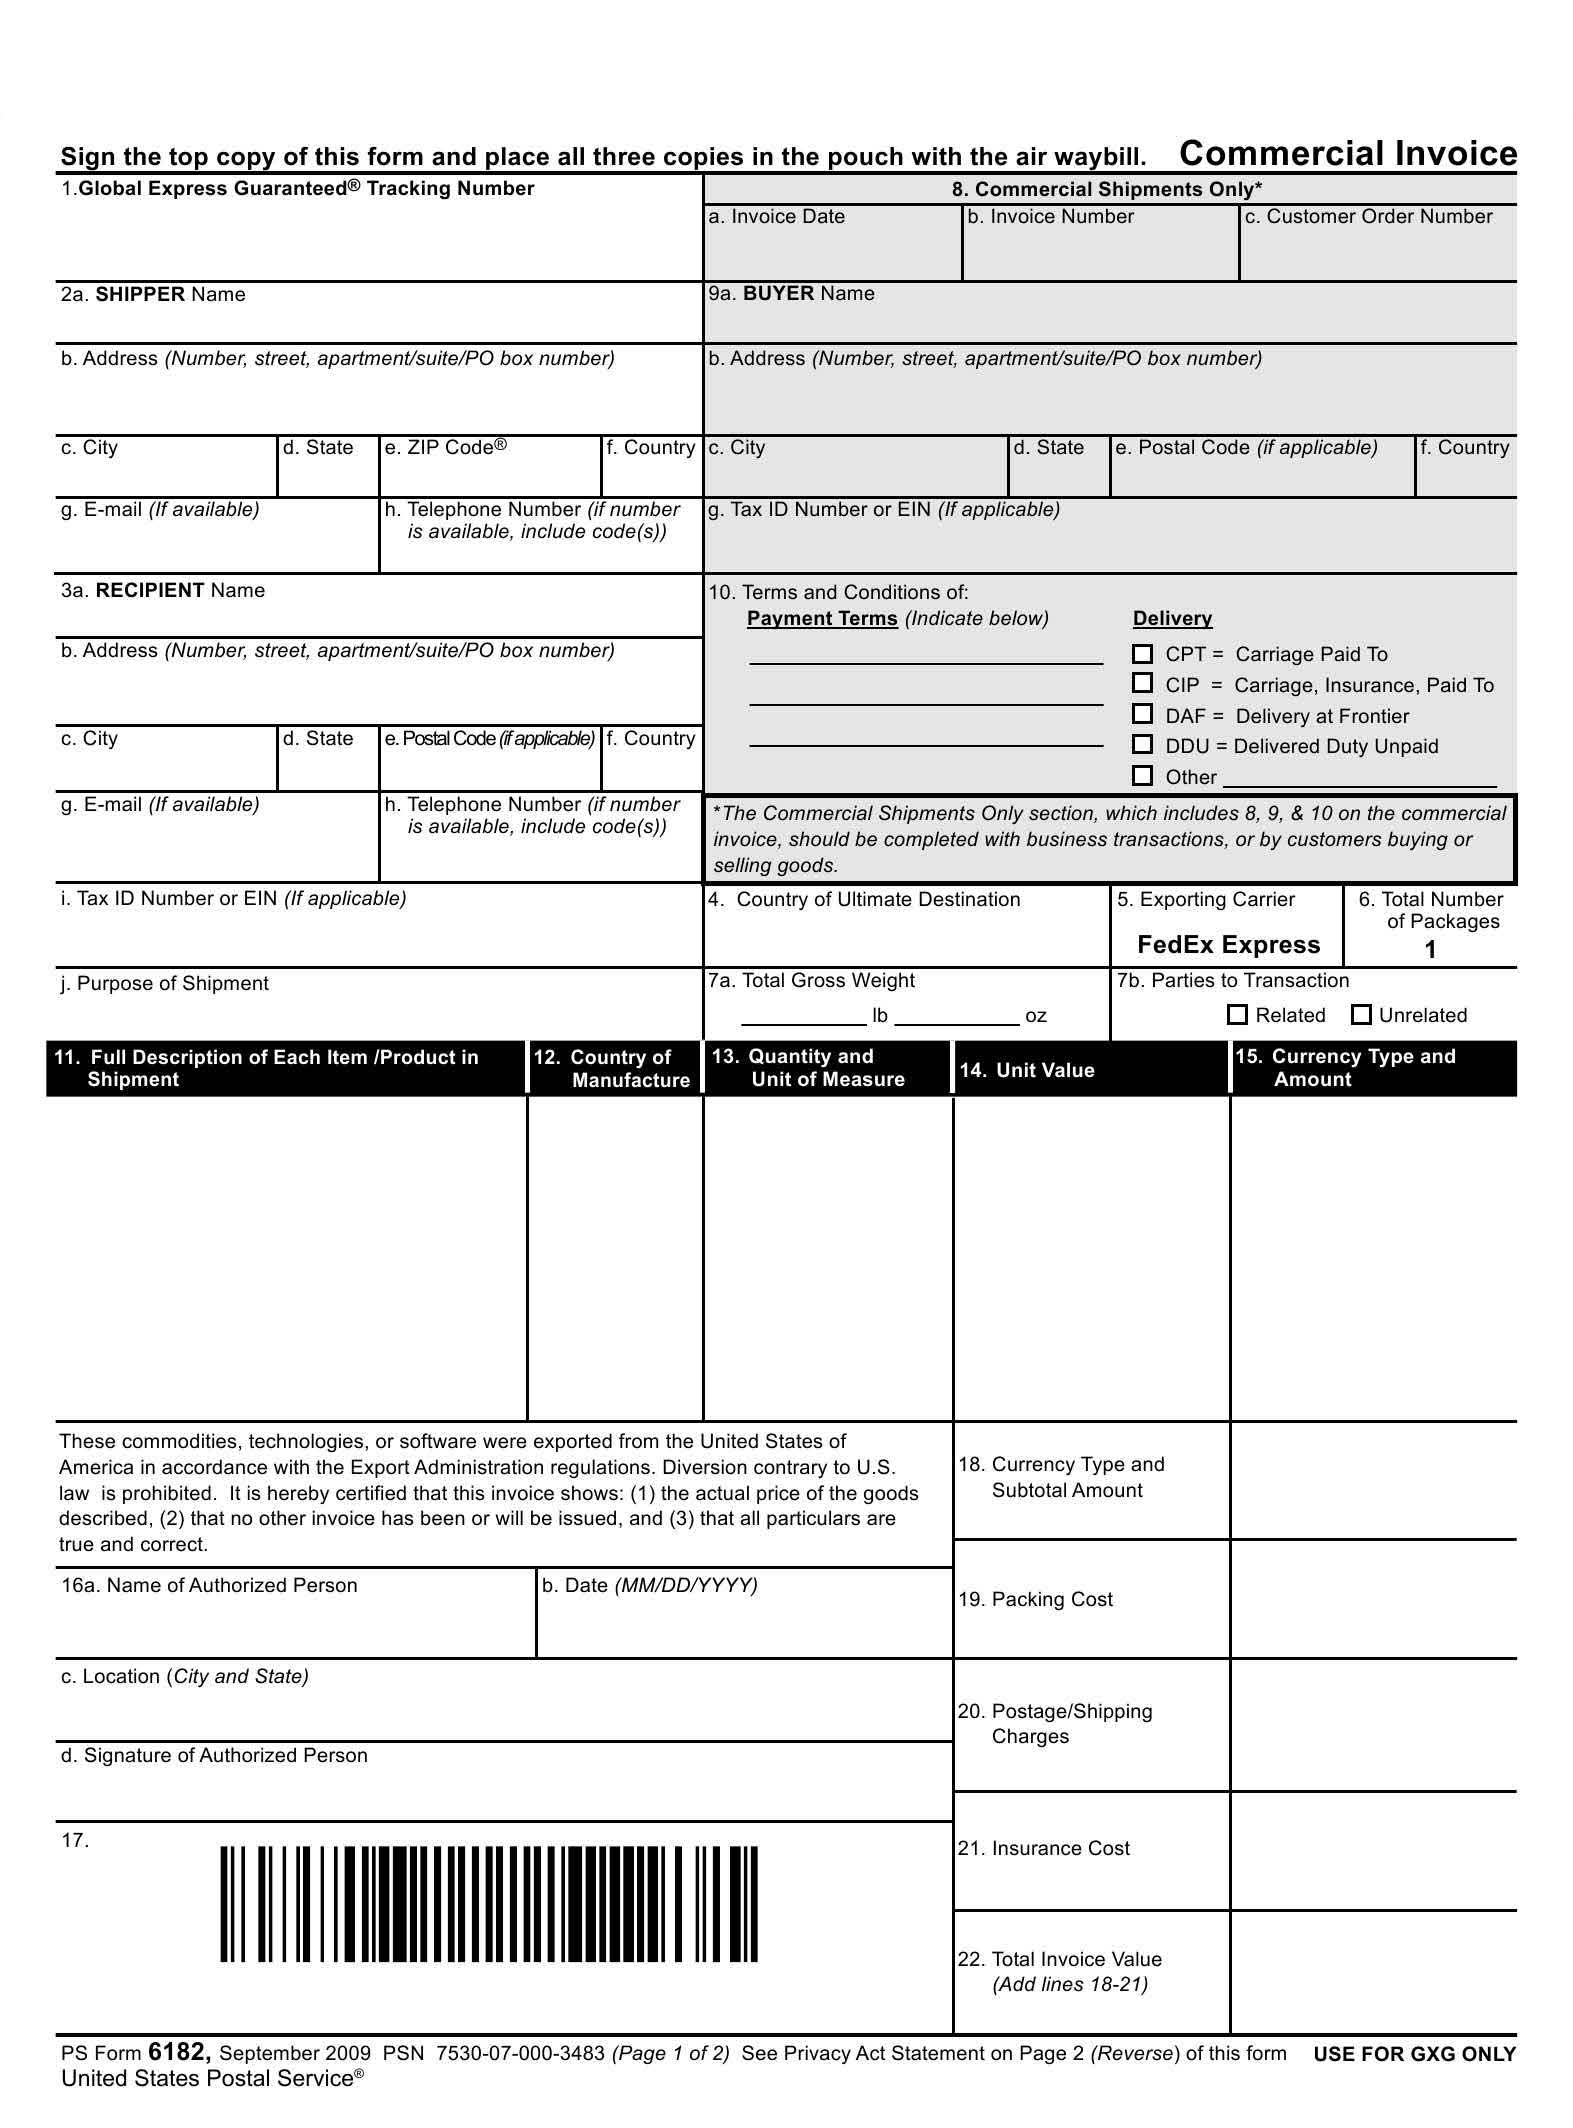 commercial invoice usps invoice number